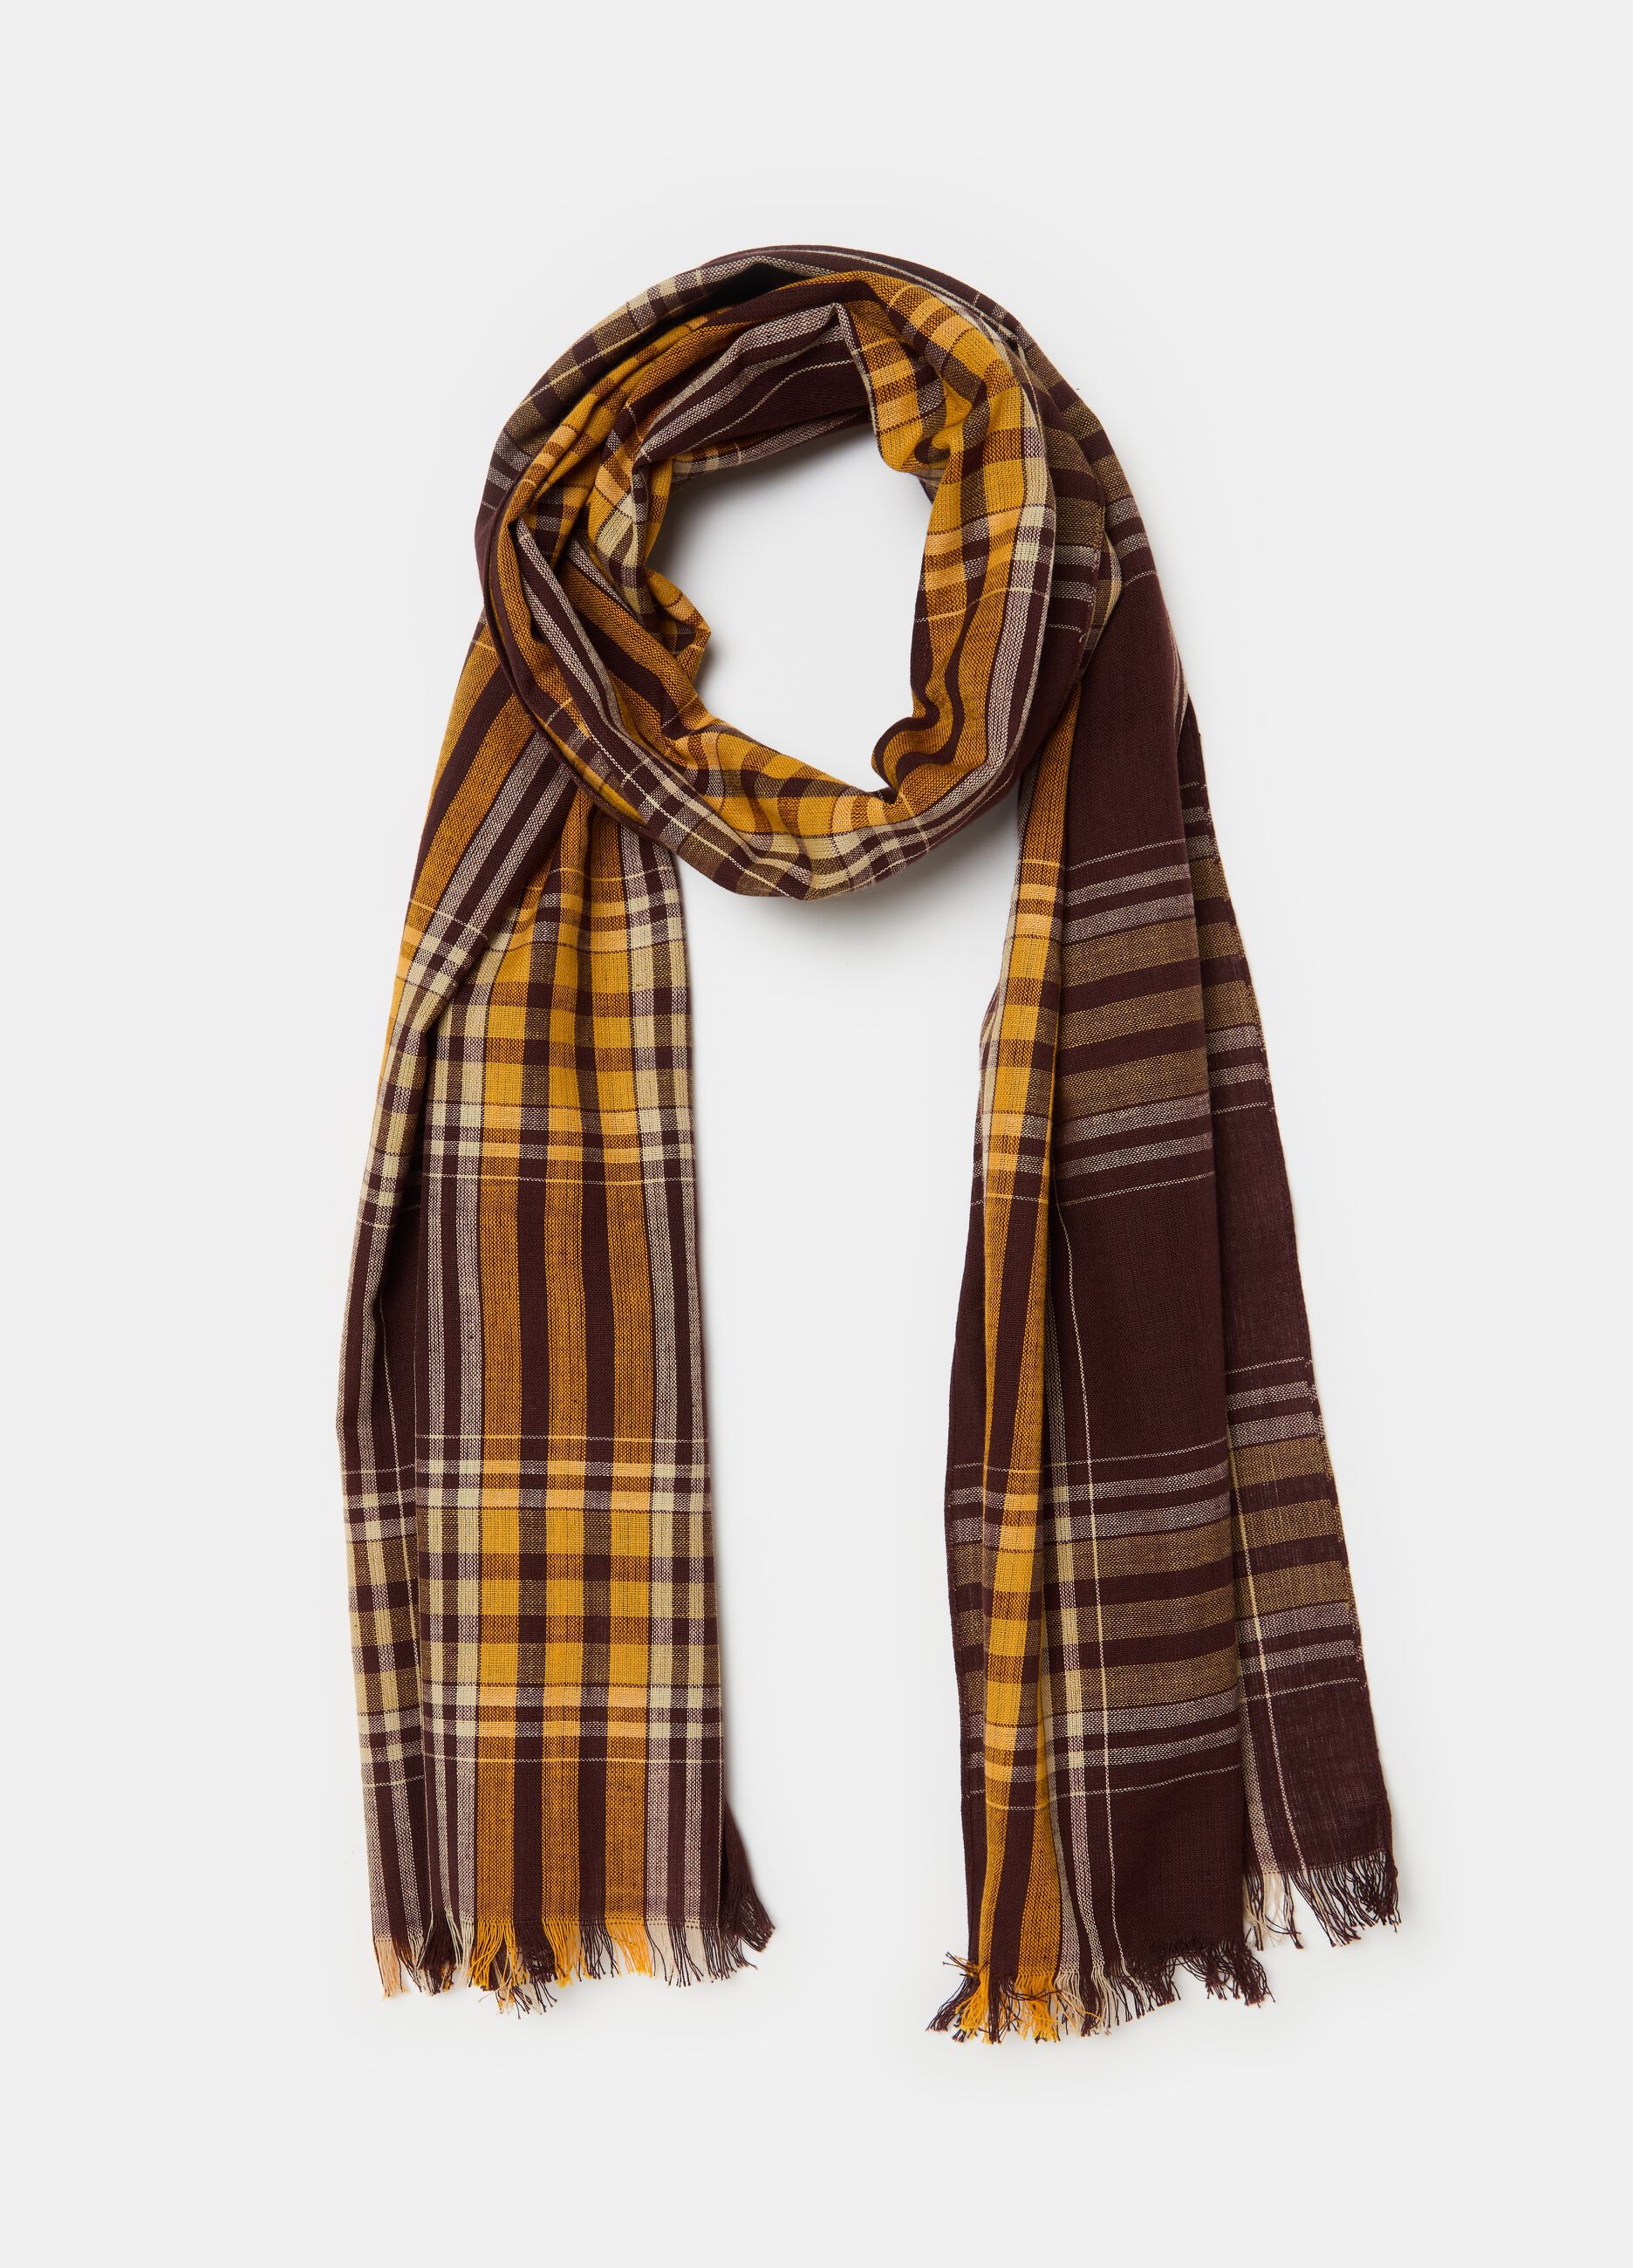 Fringed scarf with check pattern